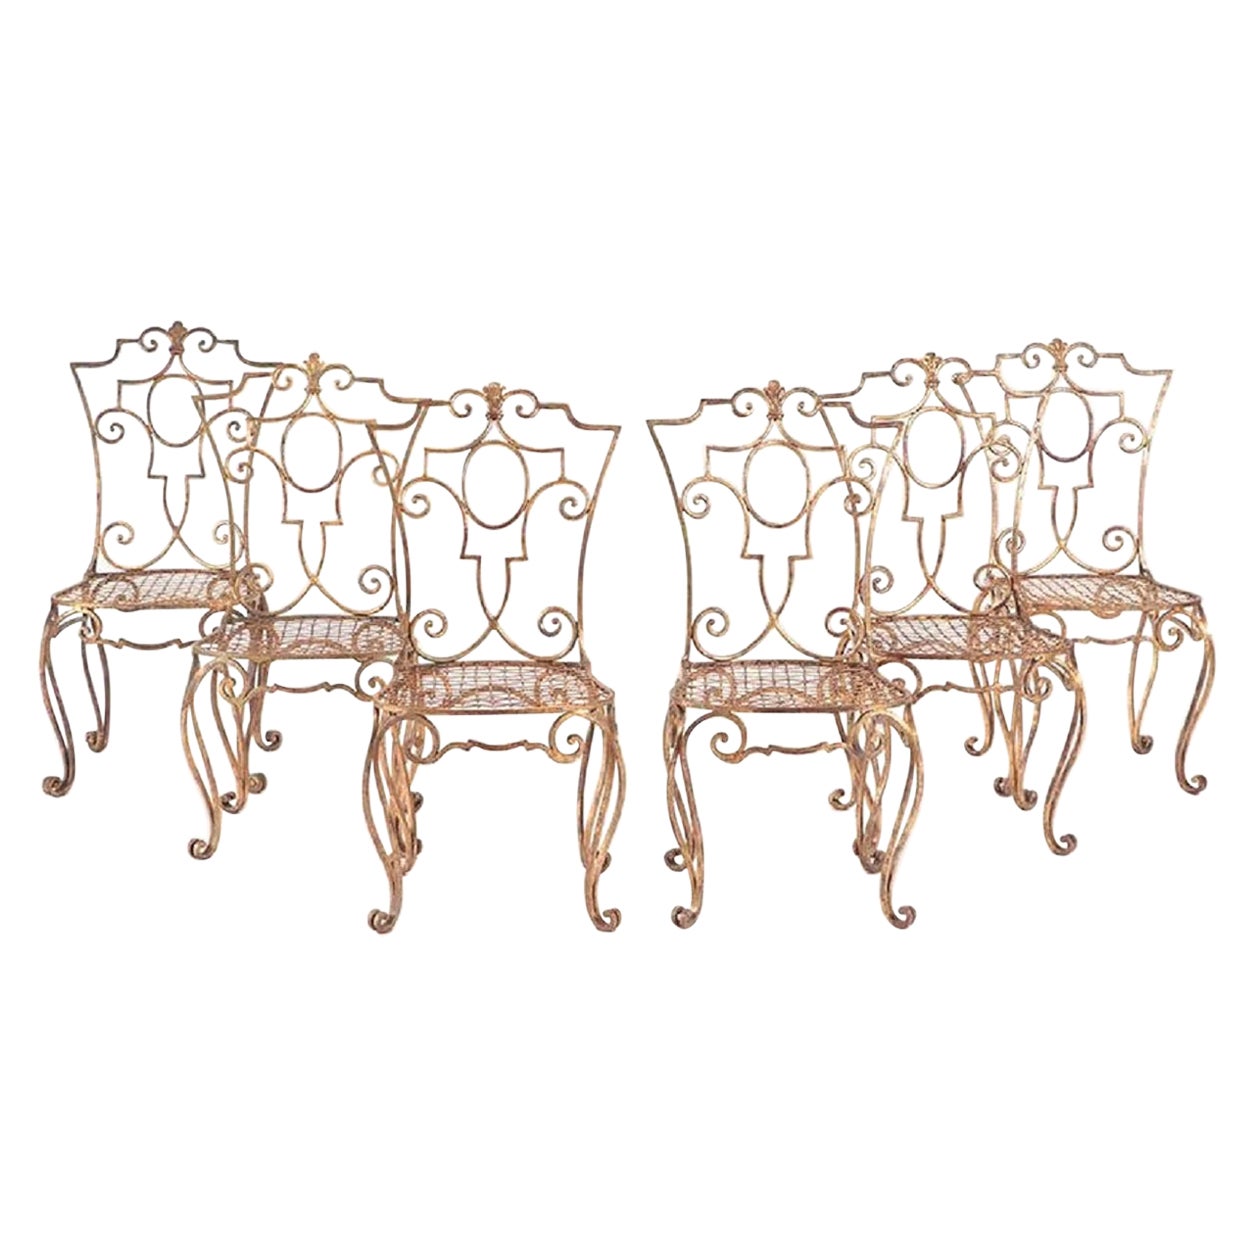 Jean-Charles Moreux Gilt Iron Chairs, Set of 6 For Sale